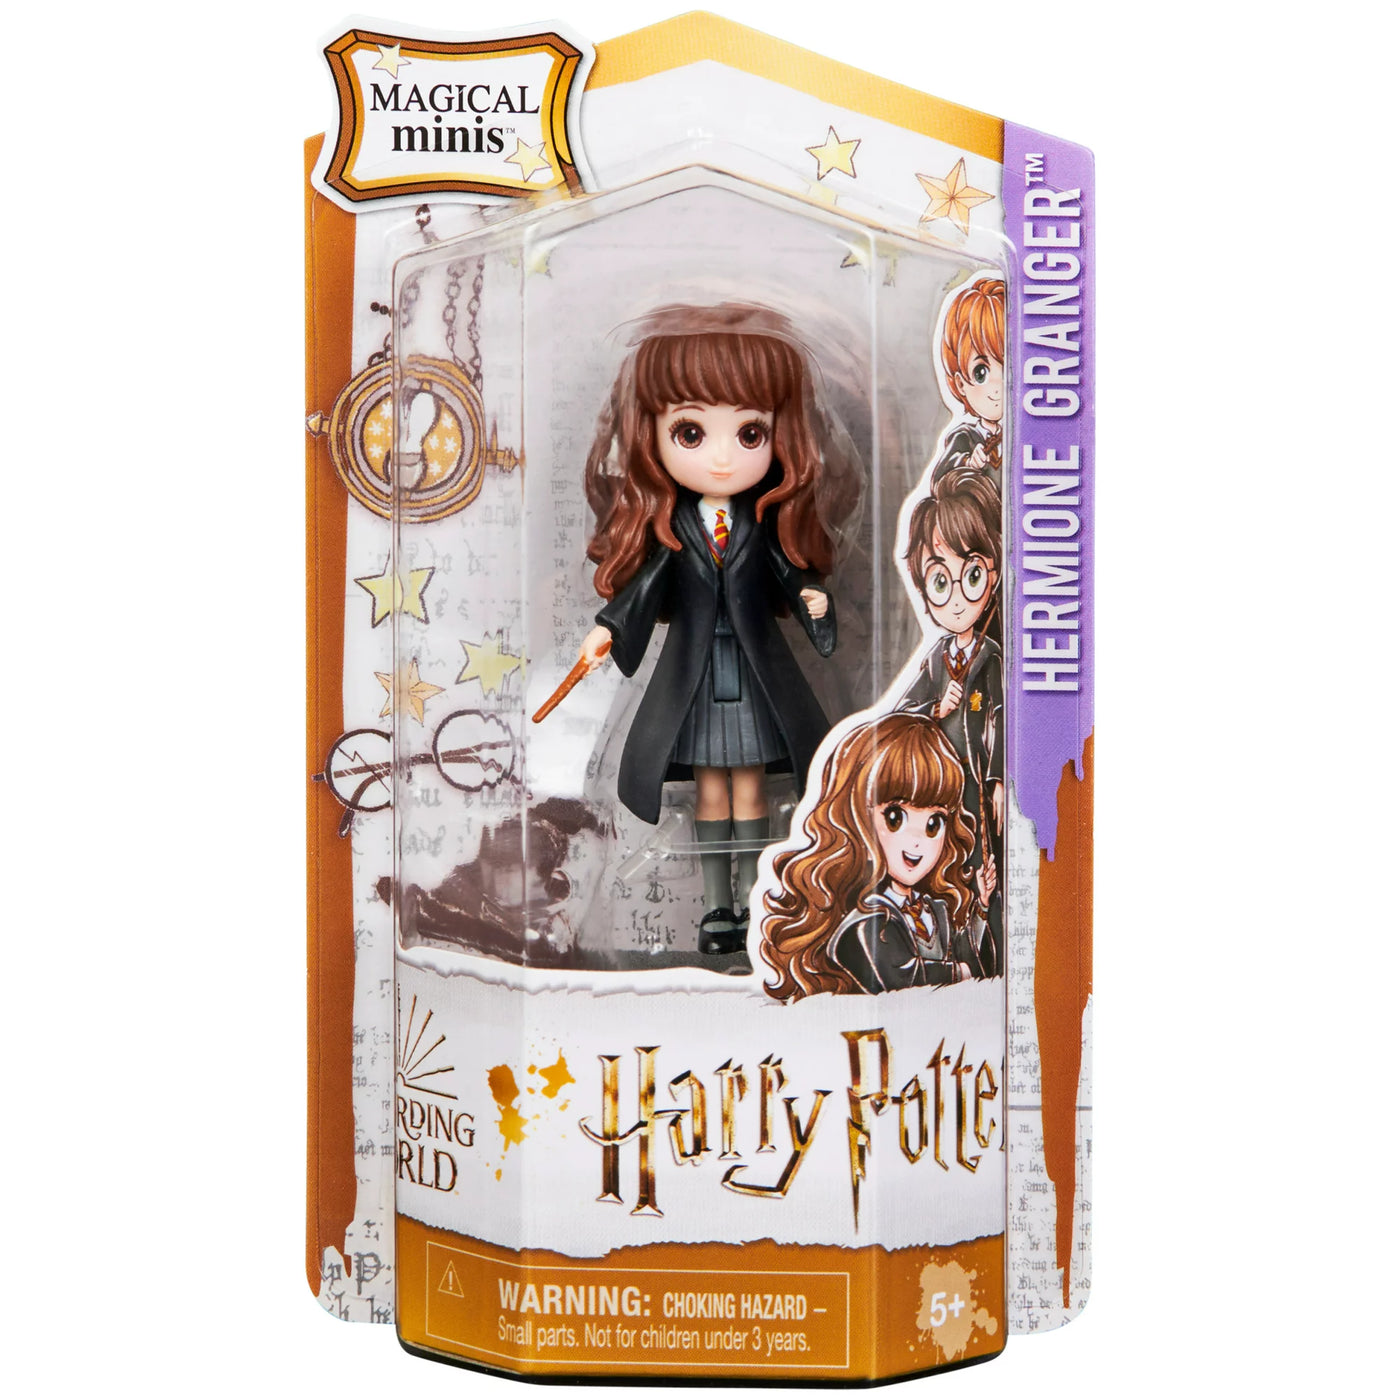 Spin Master Wizarding World, Magical Minis Harry Potter Friendship